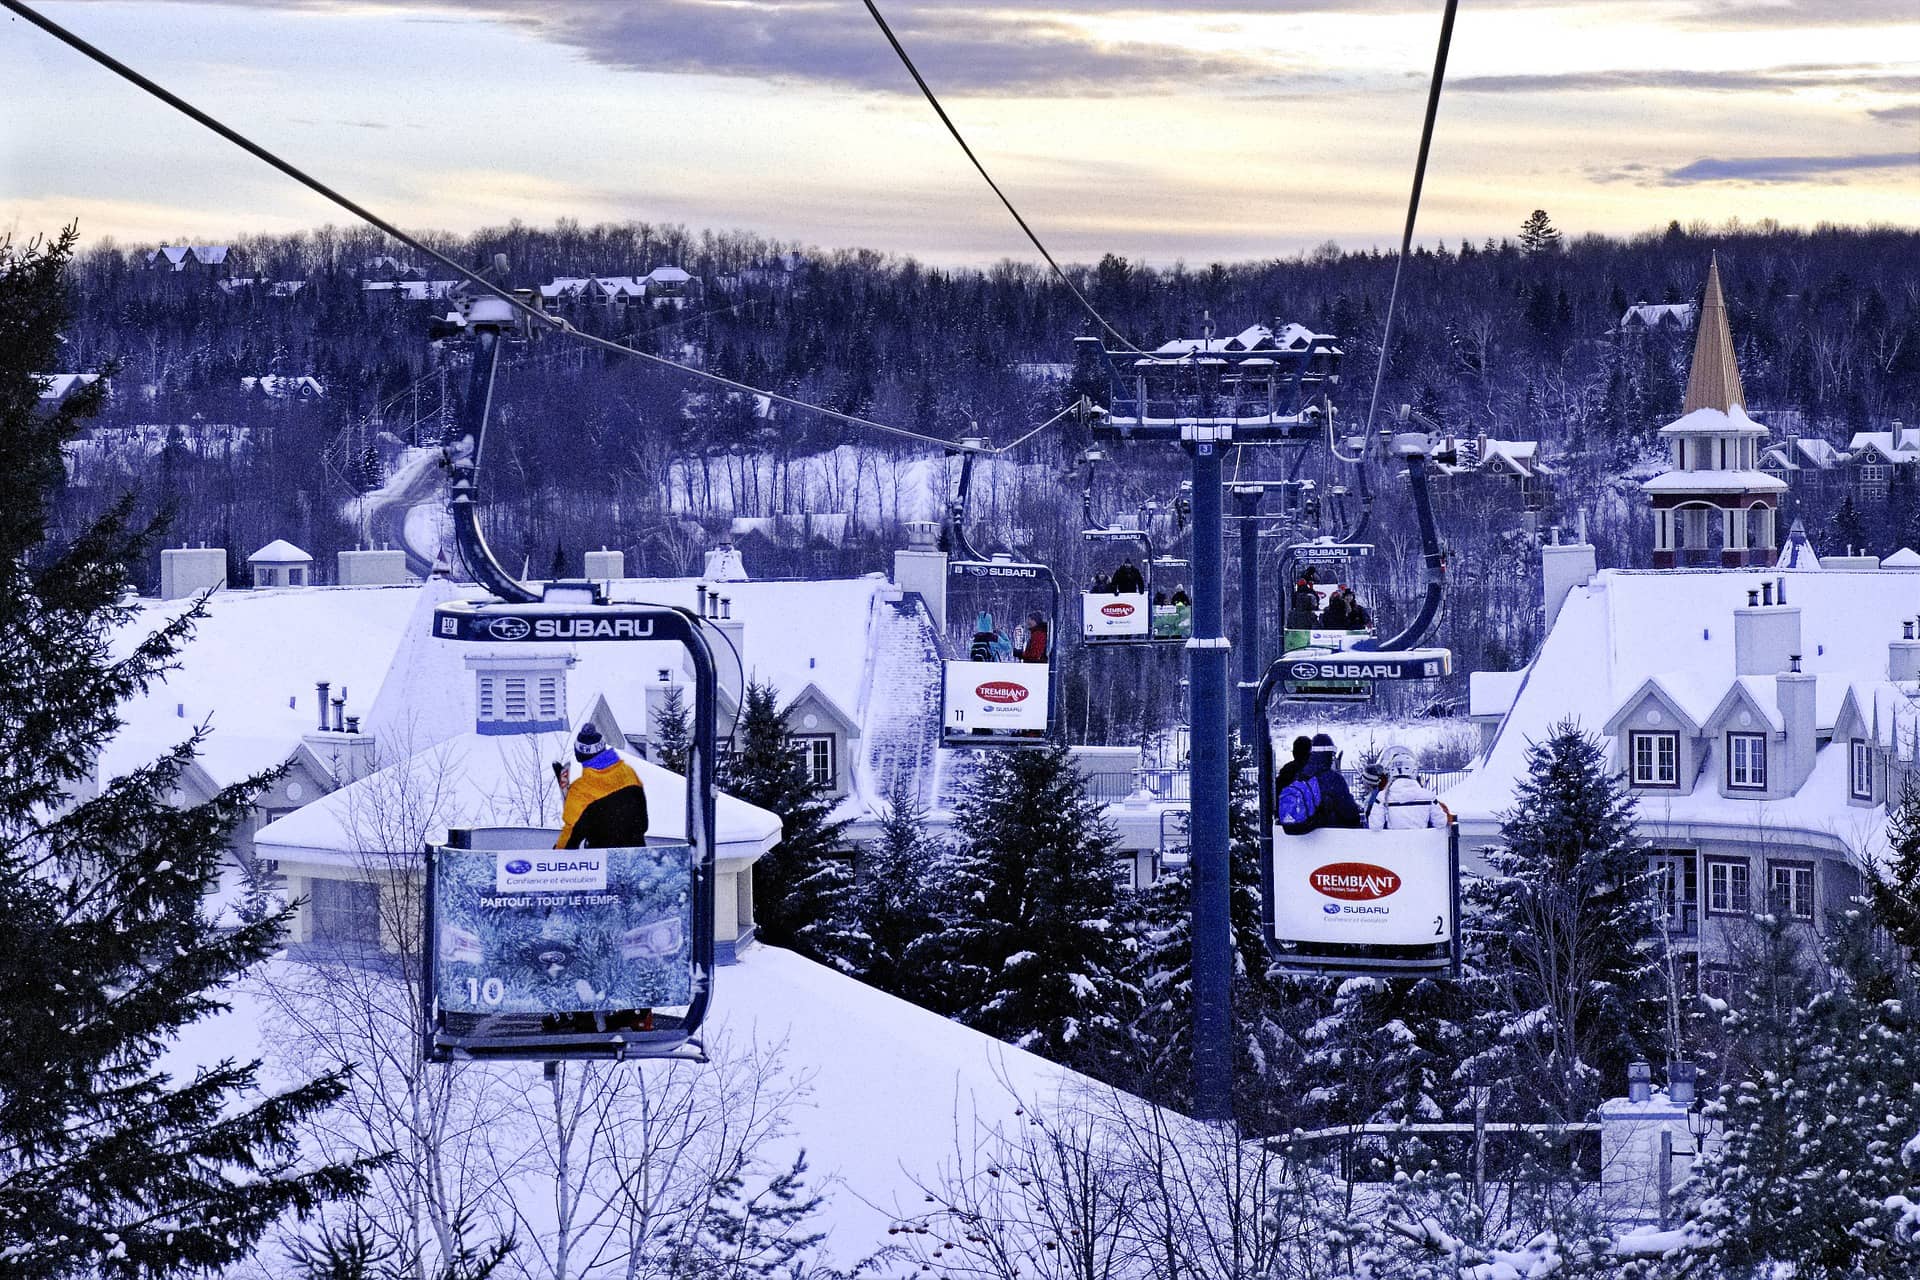 Small Tips for Mont Tremblant Trip